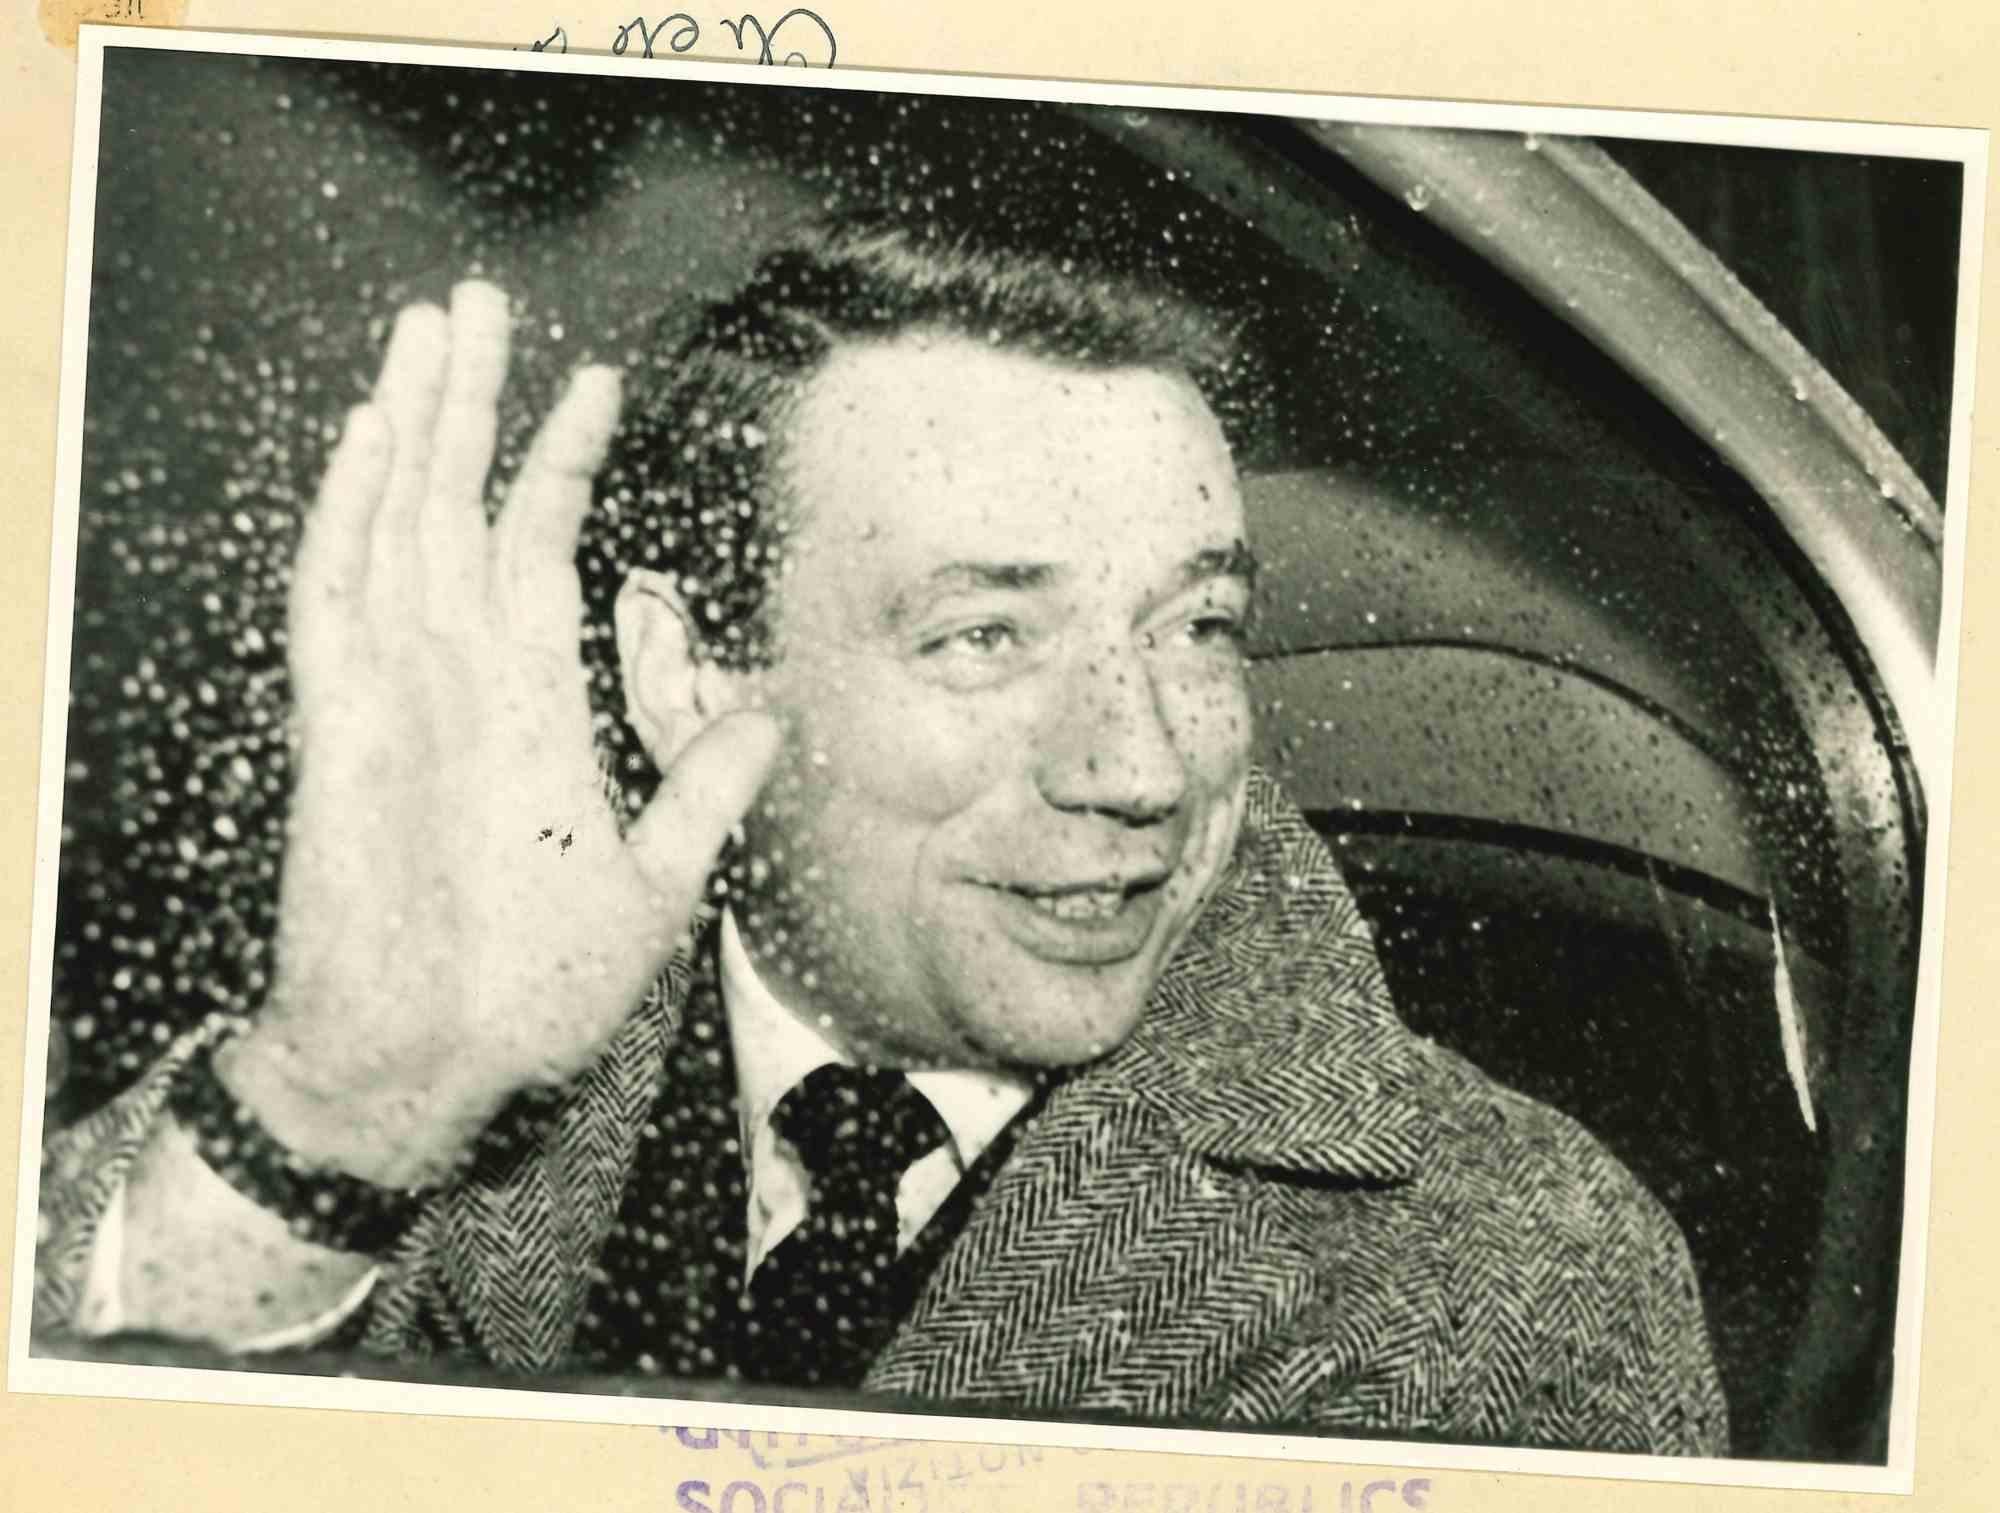 Unknown Figurative Photograph - Yves Montand - Photo - 1970s